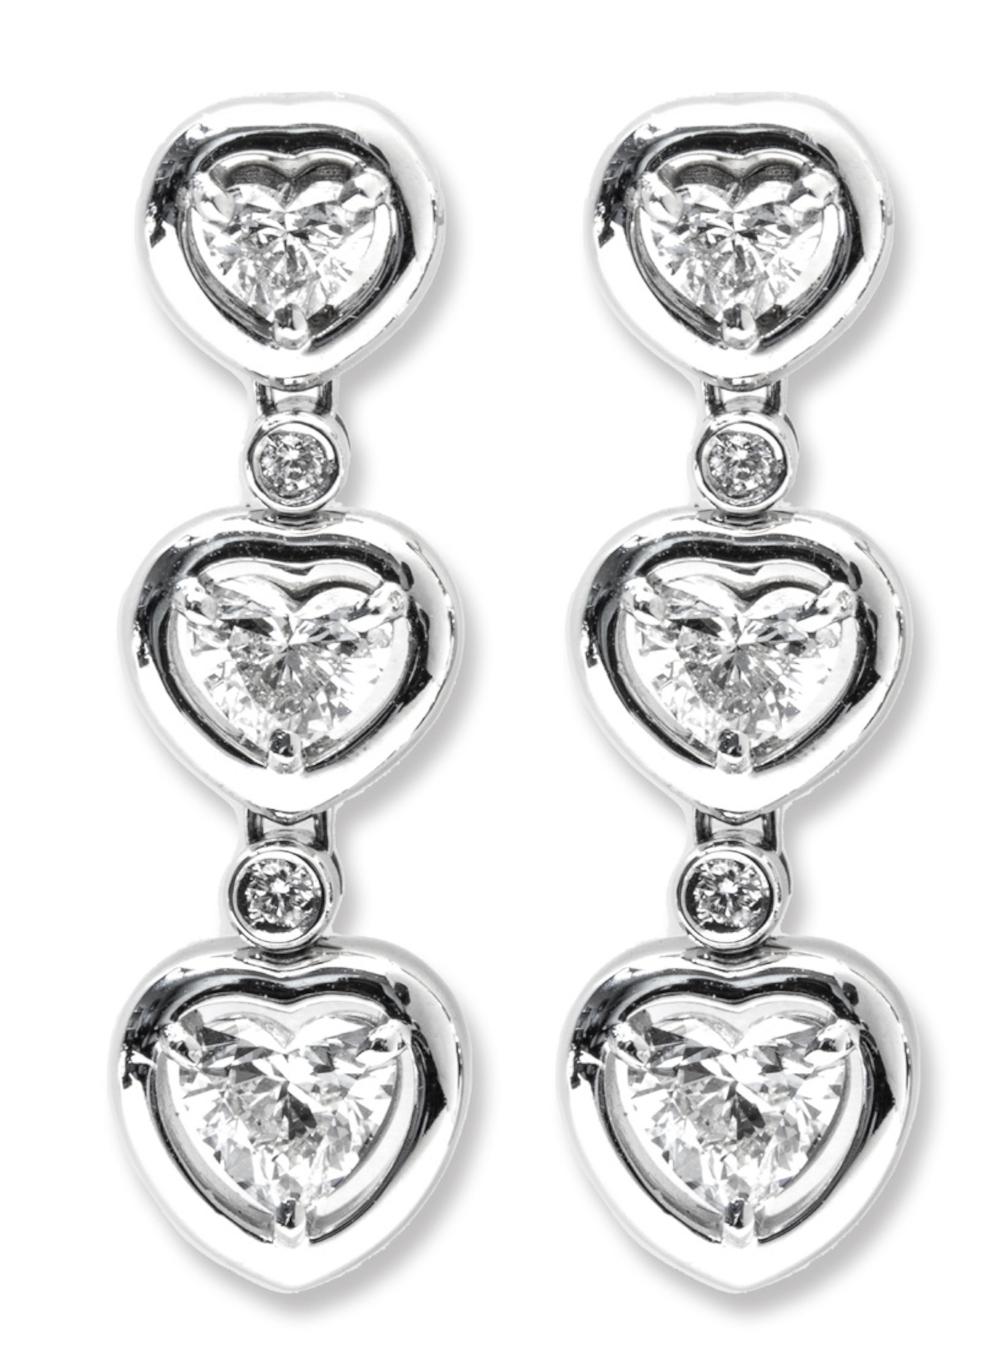 These enchanting earrings stand as a testament to the enduring beauty of love, embodied in every facet.
Expertly crafted in the finest 18K white gold, these stud earrings showcase three heart-cut diamonds, boasting a total of 1.45 carats. The